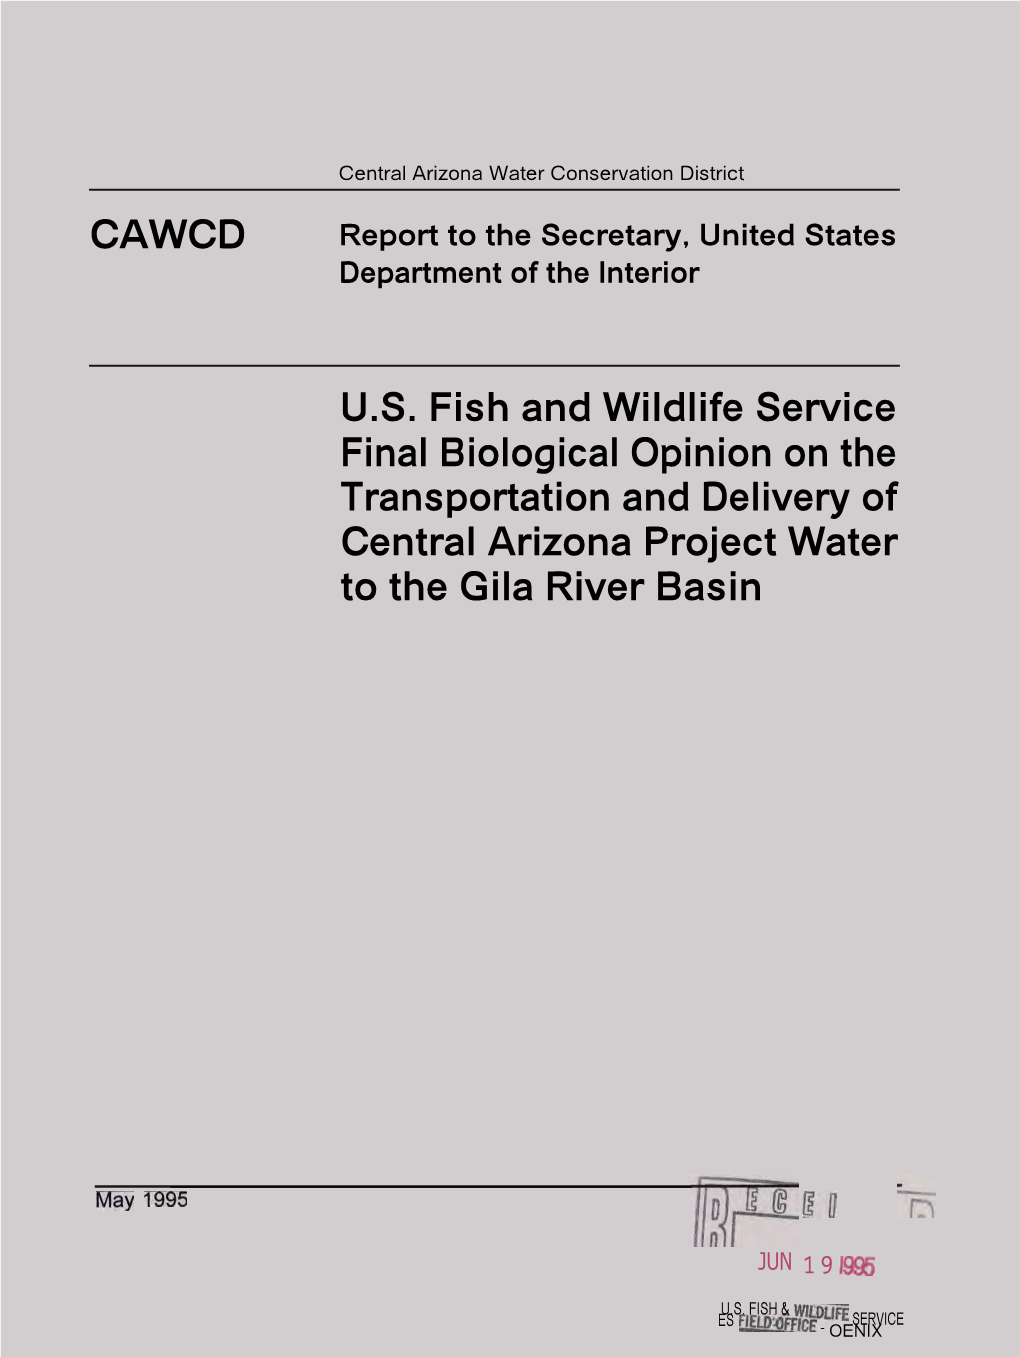 CAWCD U.S. Fish and Wildlife Service Final Biological Opinion on The